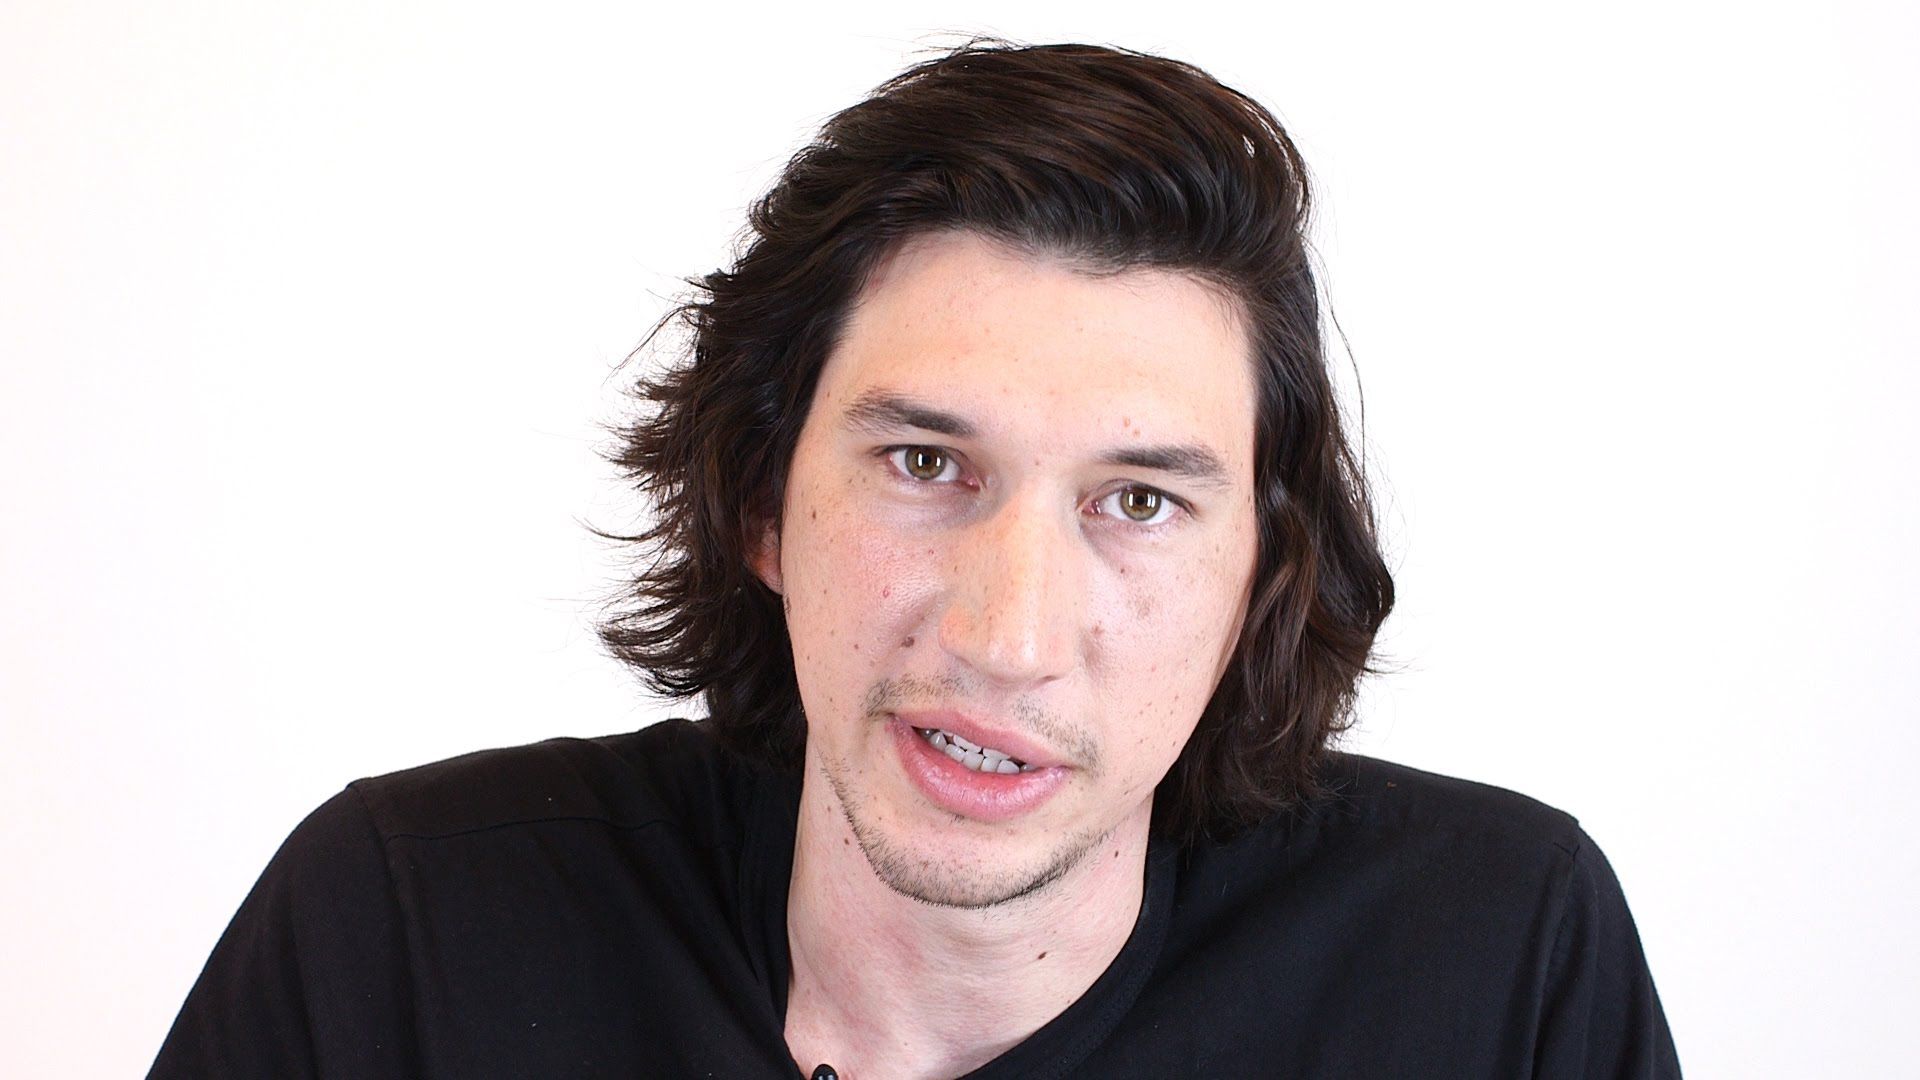 Adam Driver Latest Full HD Wallpapers And Images - 1080p 